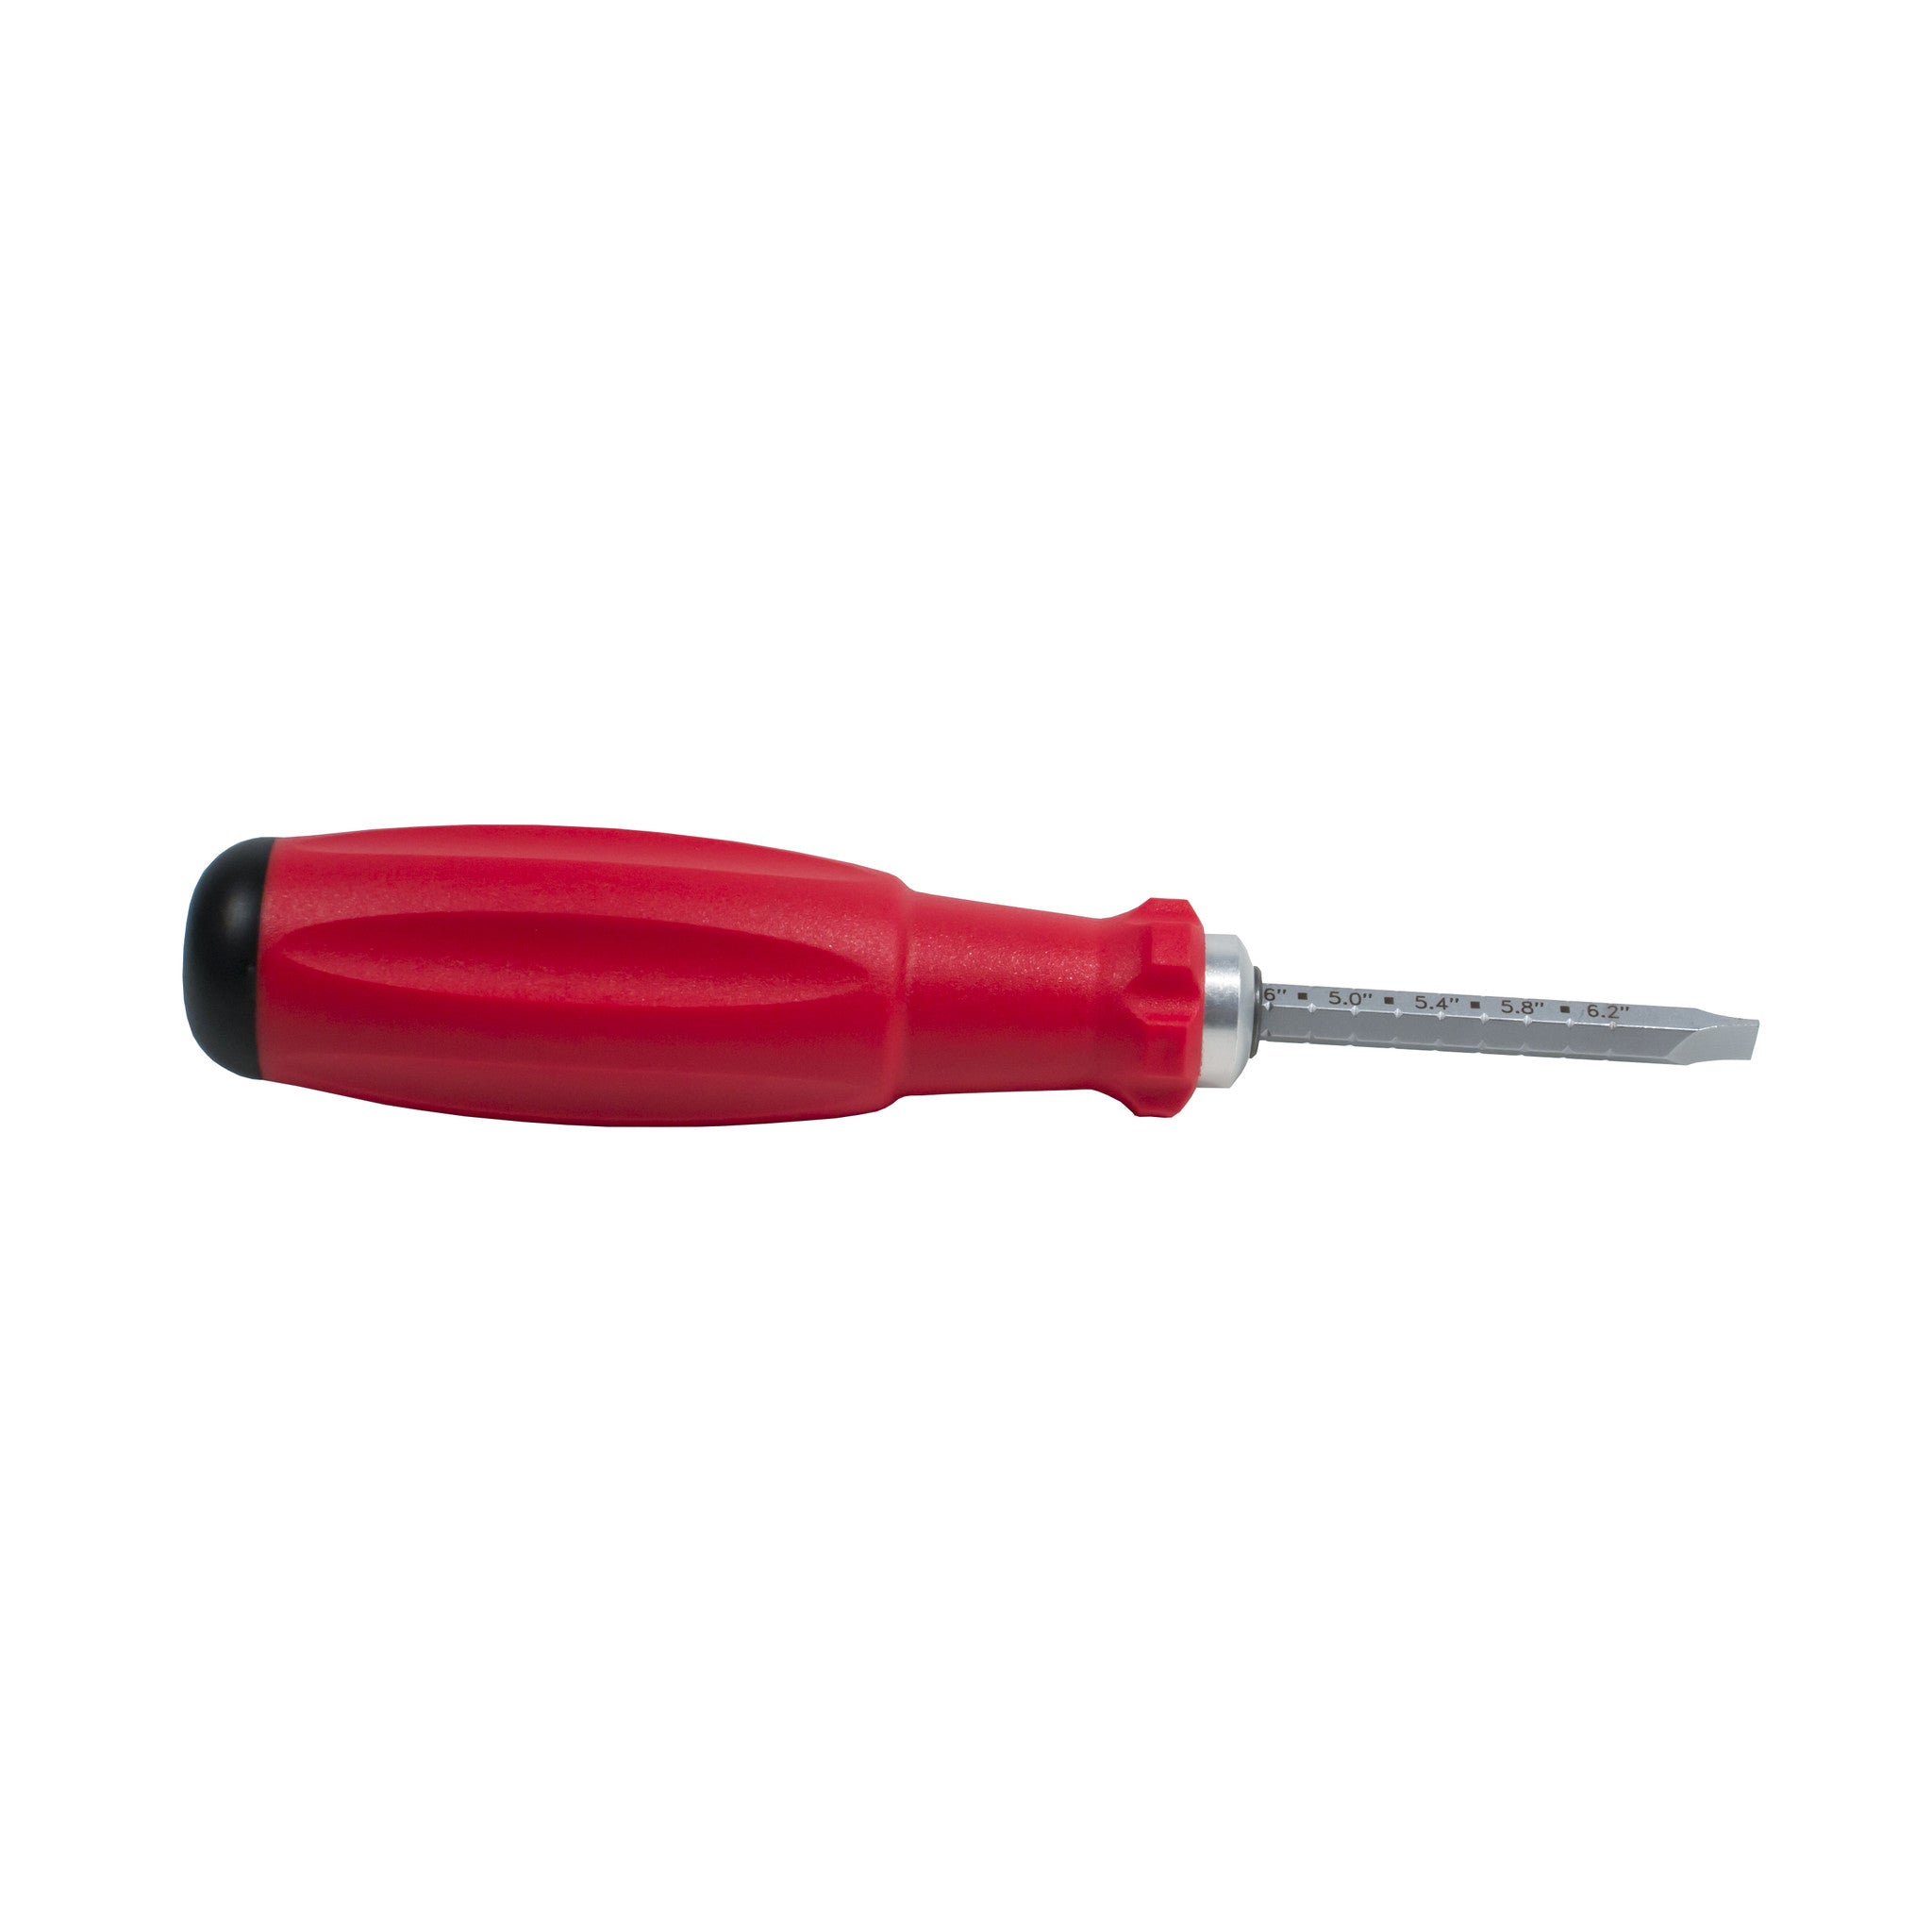 Phillips and Slotted Extendable Screwdriver with Measurement Gauge